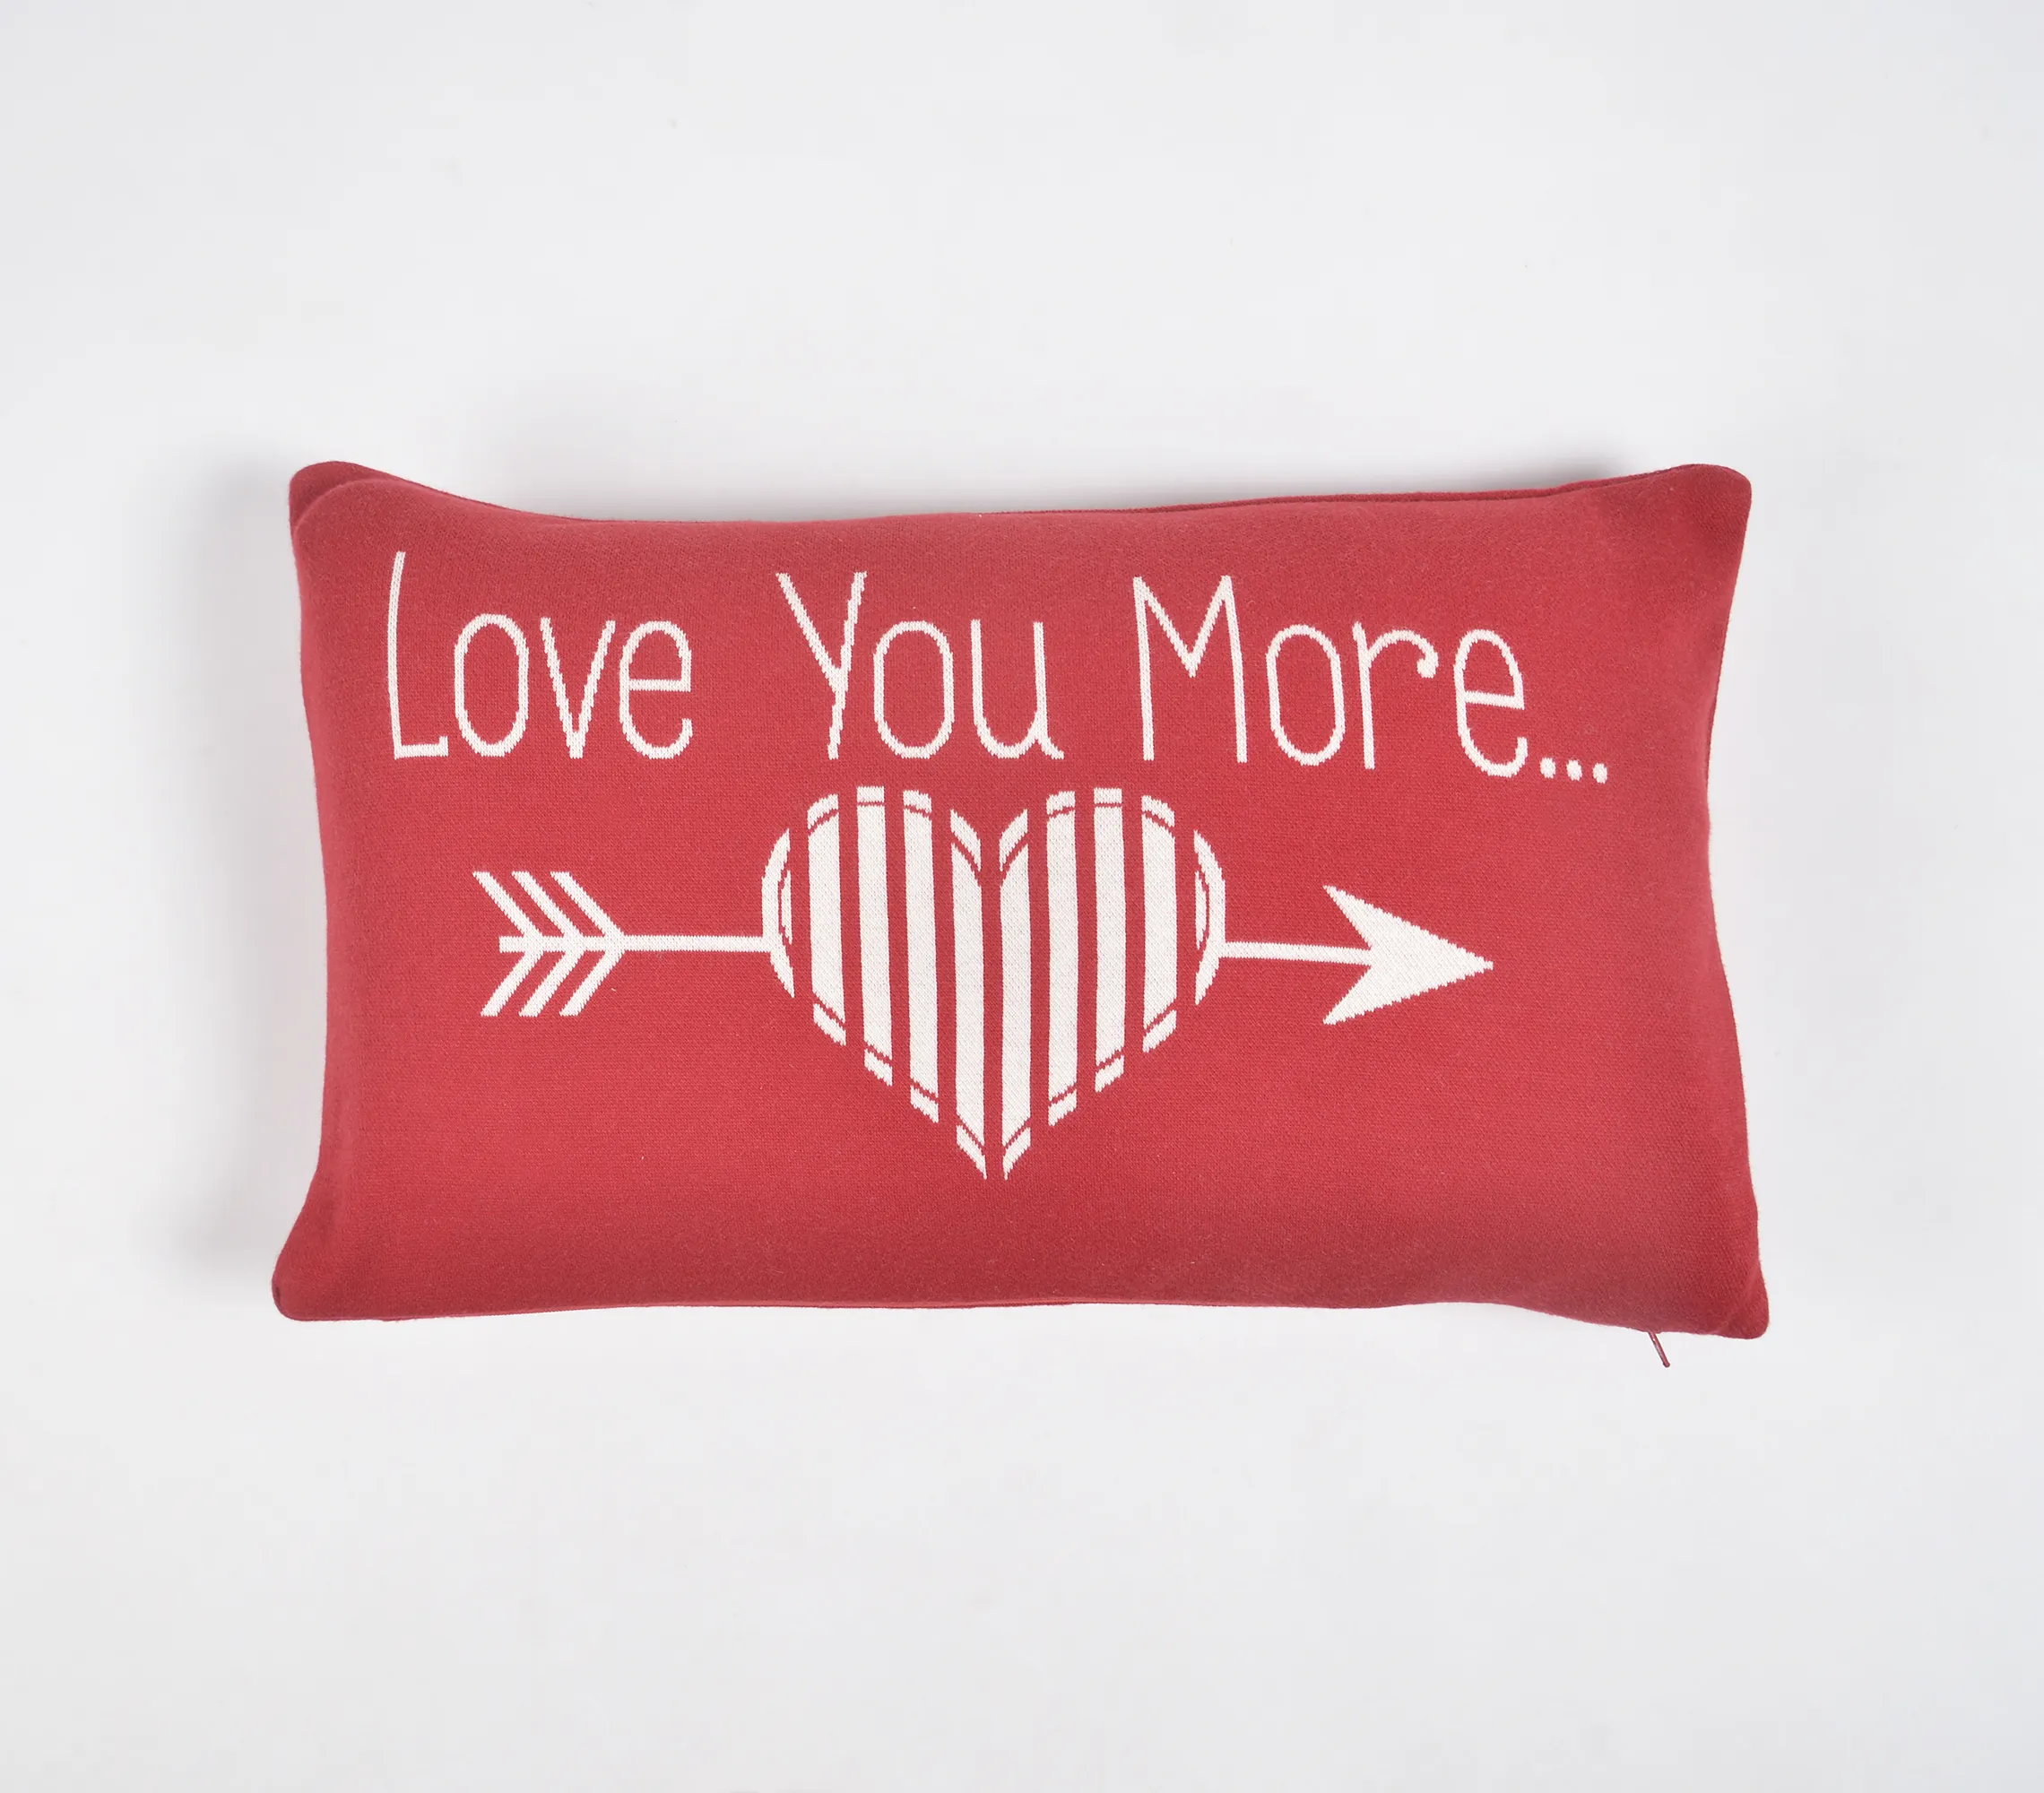 Qalara Knitted Cotton Typographic Red Lumbar 'Love You More' Cushion Cover (20*12 Inch)